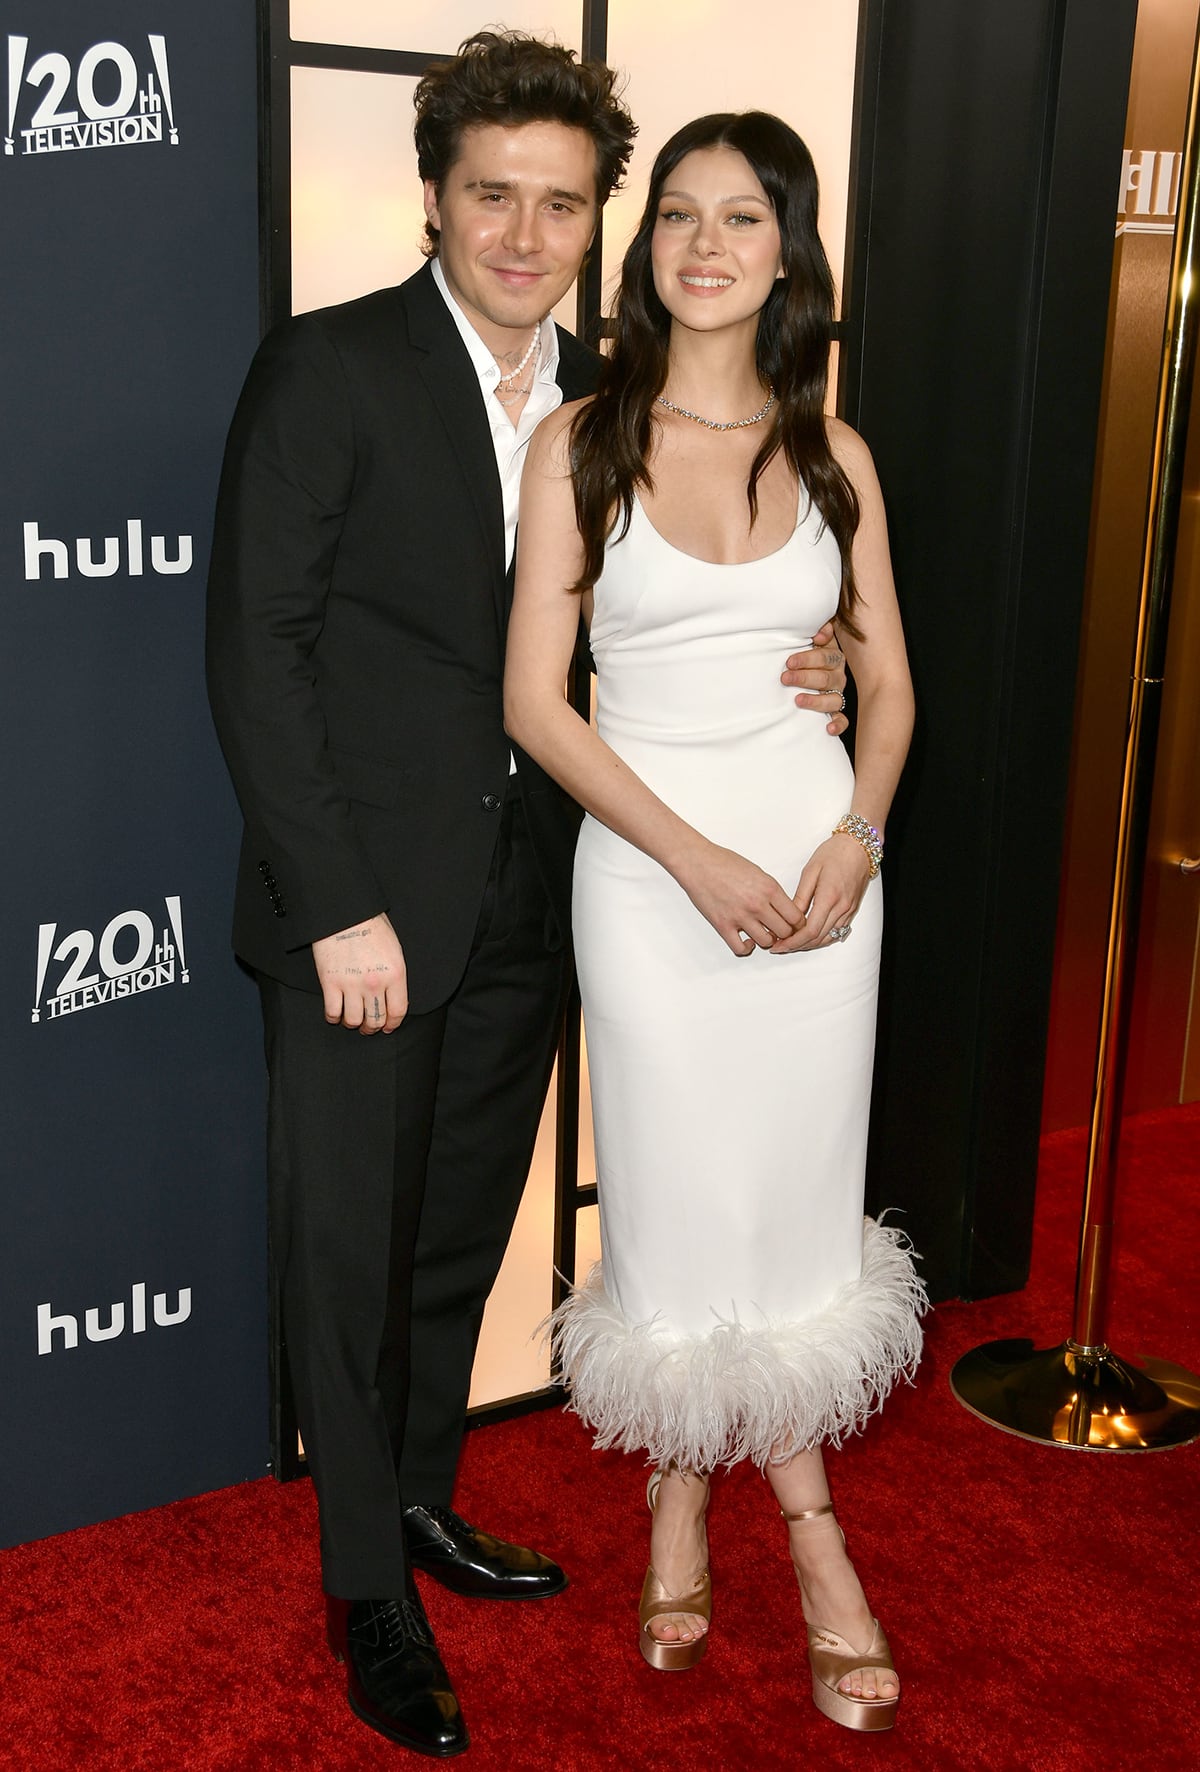 Brooklyn Beckham accompanies his wife Nicola Peltz at the Los Angeles premiere of Hulu's Welcome to Chippendales